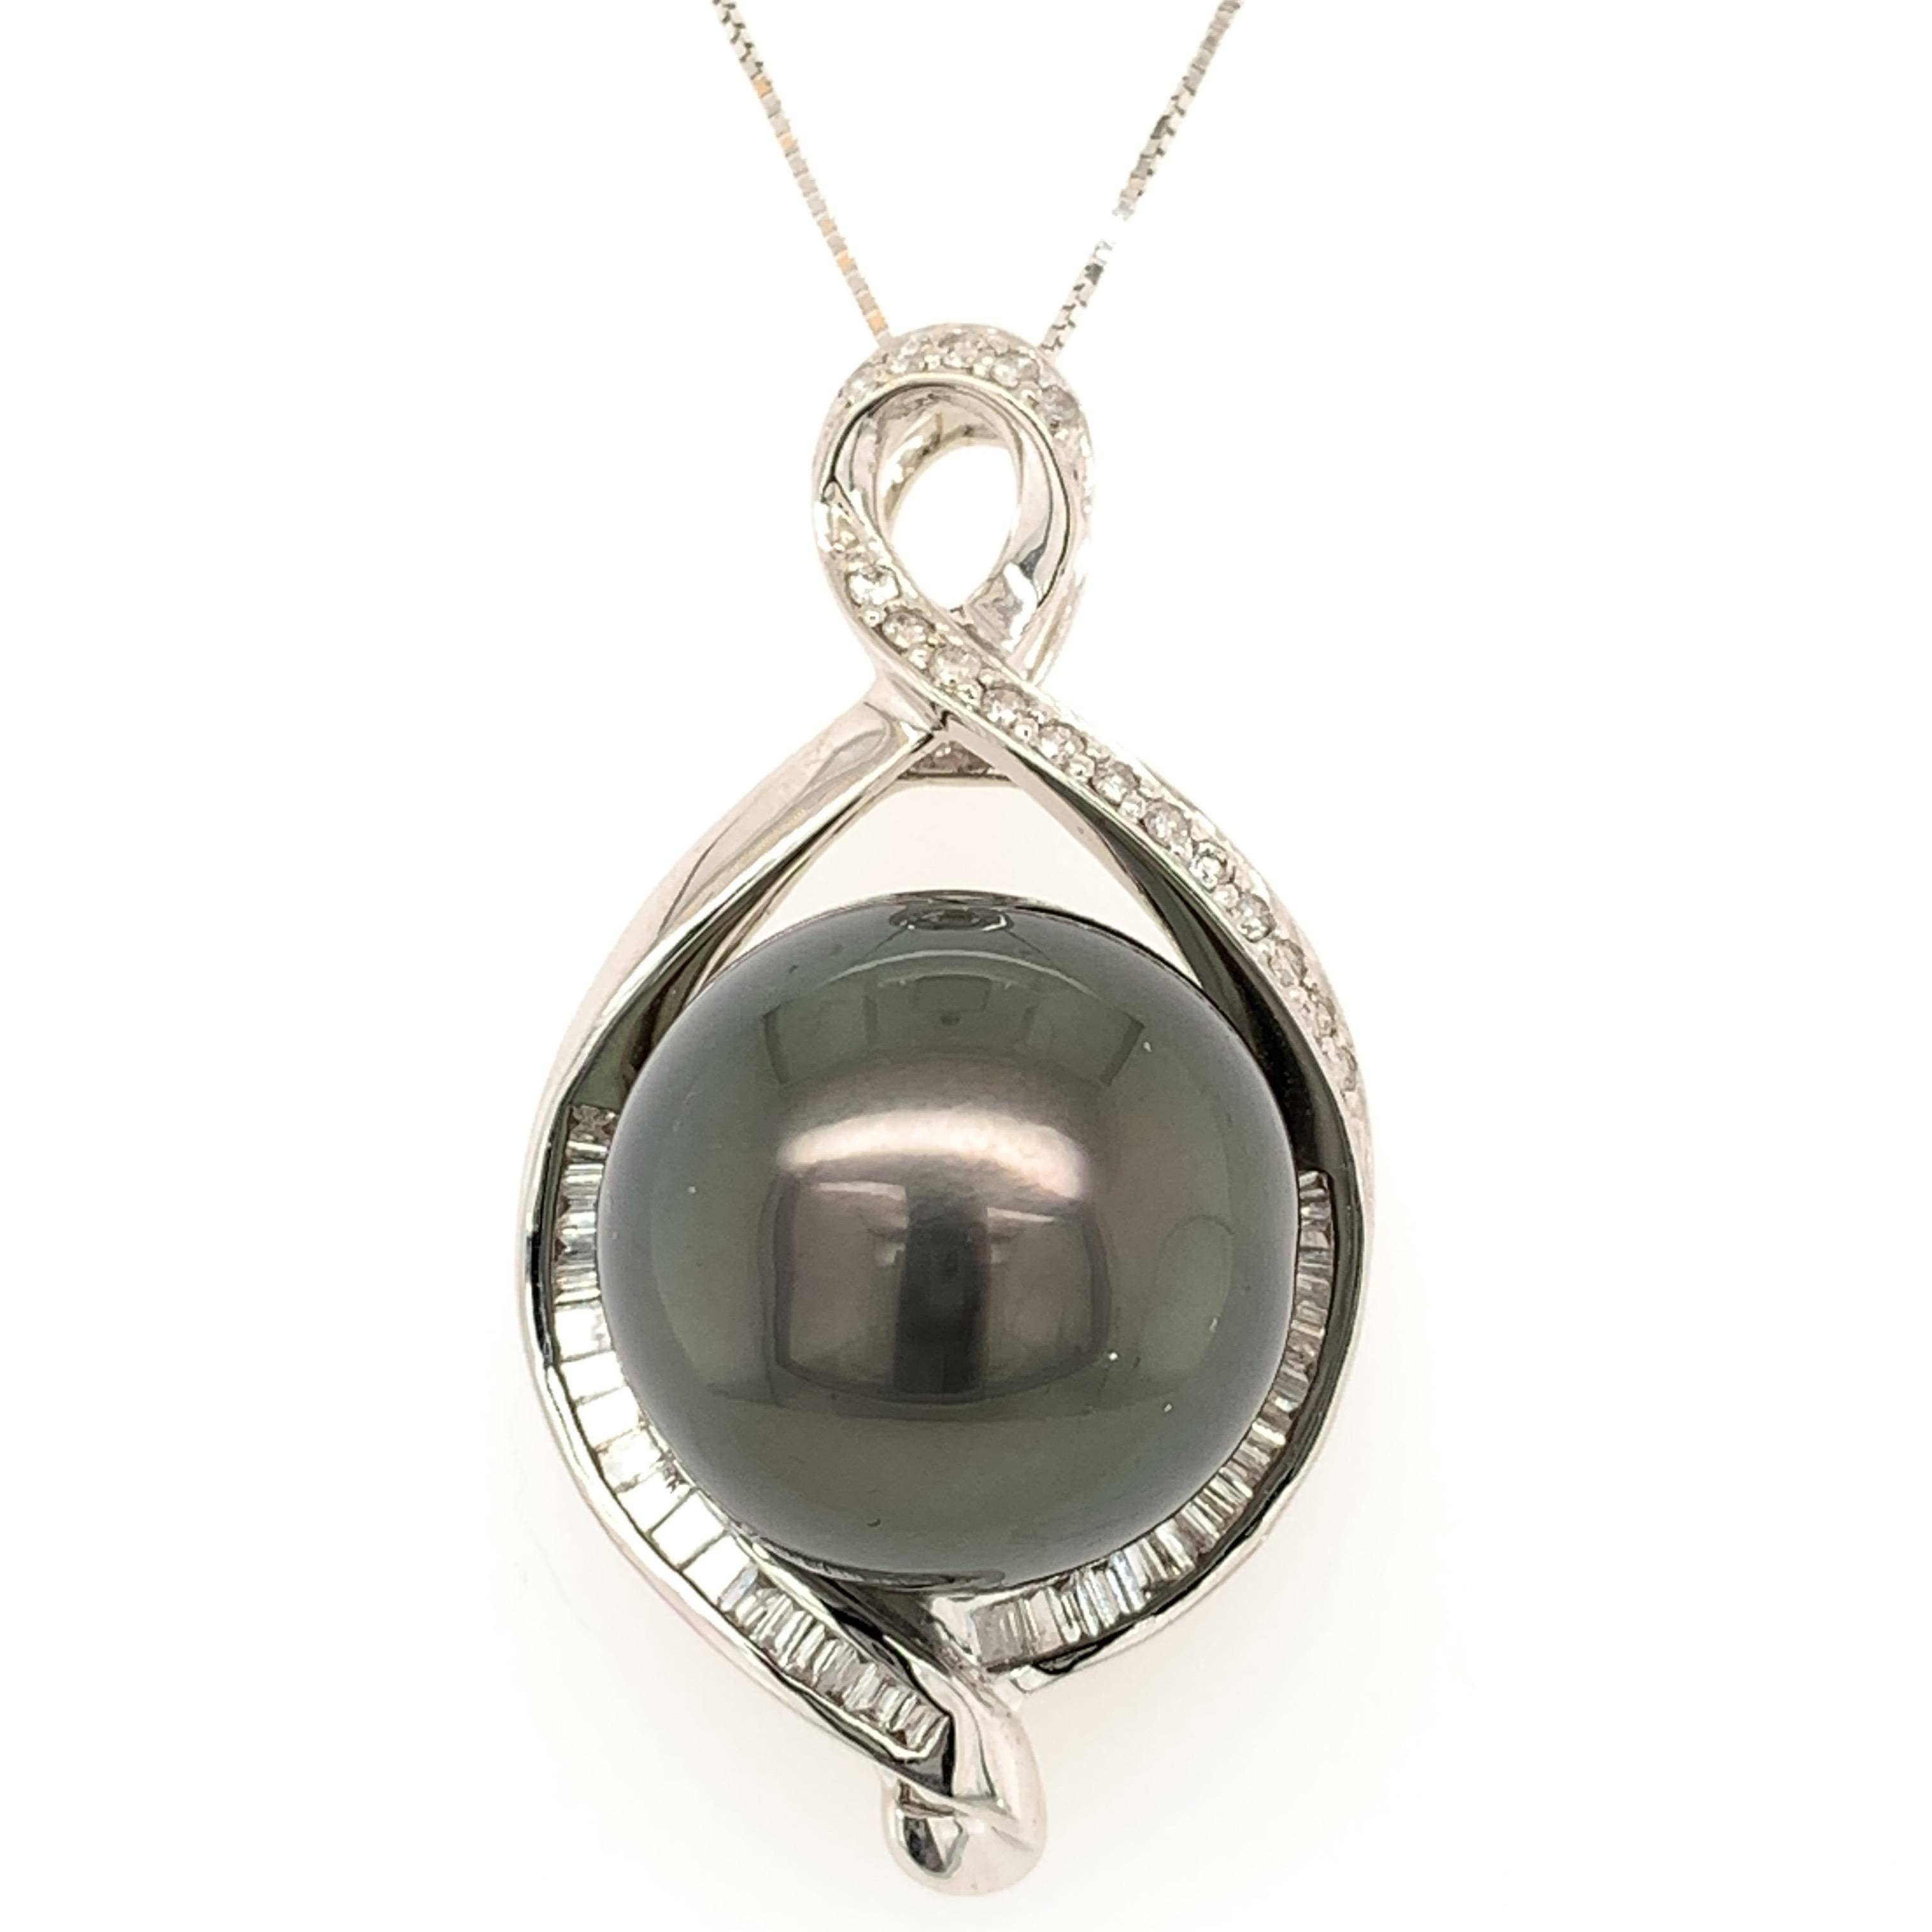 Stunning large Tahitian pearl pendant.  Very good luster, round 15.7mm Tahitian pearl, black with rose' and green overtone, accented with baguette cut and round brilliant cut diamonds. Handcrafted design set in 18 karats white gold, along with 10